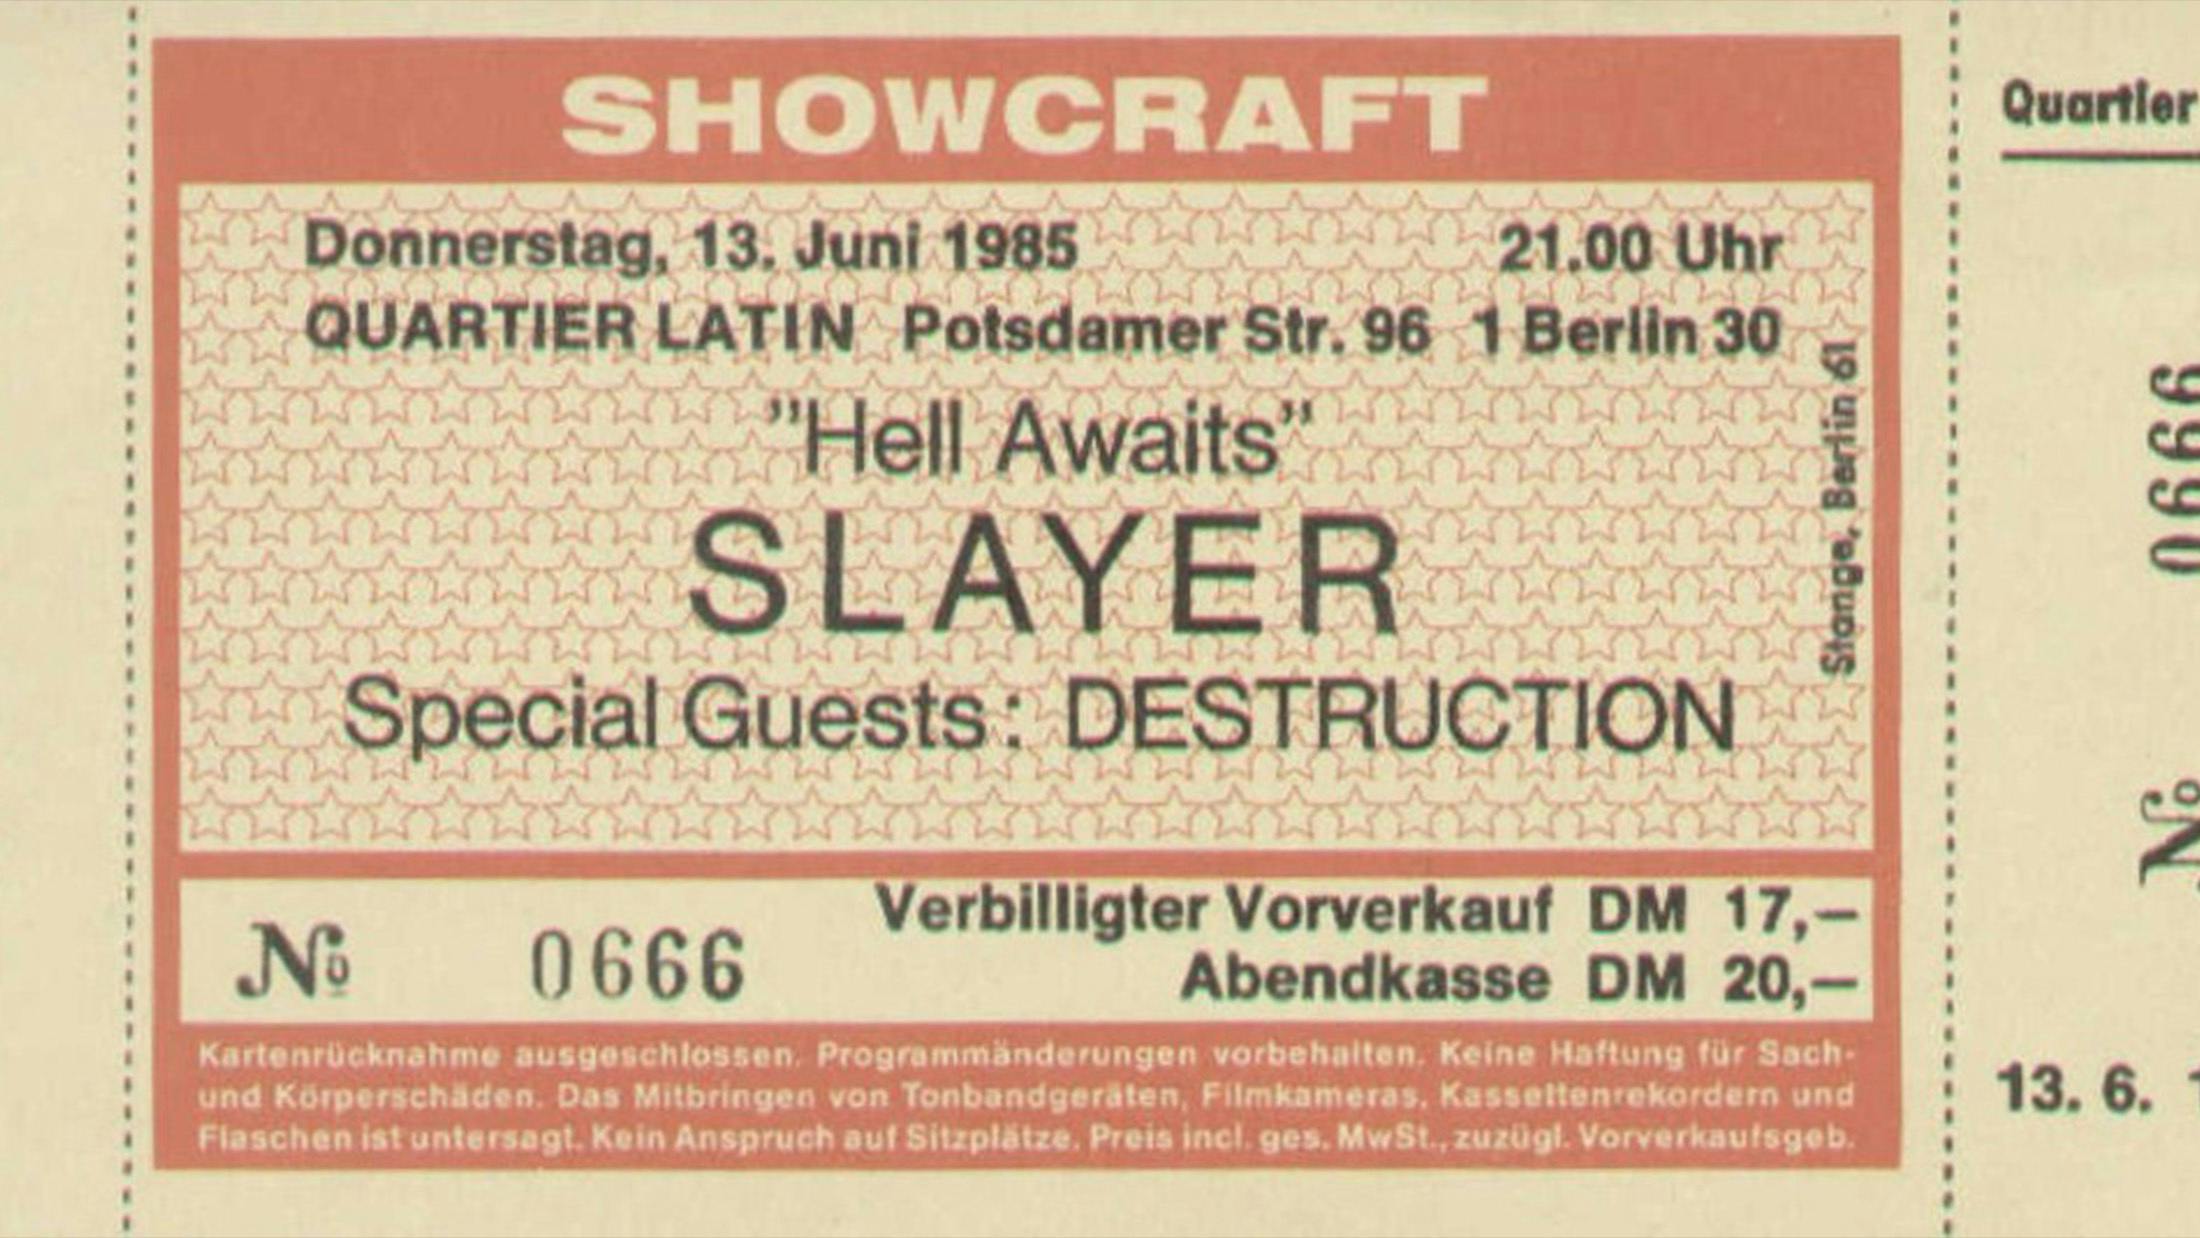 In 1985, the Slayer Hell Awaits tour was our first big one. This ticket is from the Berlin show, where Slayer got us so drunk on vodka after the gig that the bill of the Destruction of the hotel room was higher than our tour fee. We had great fun but learned our lesson!